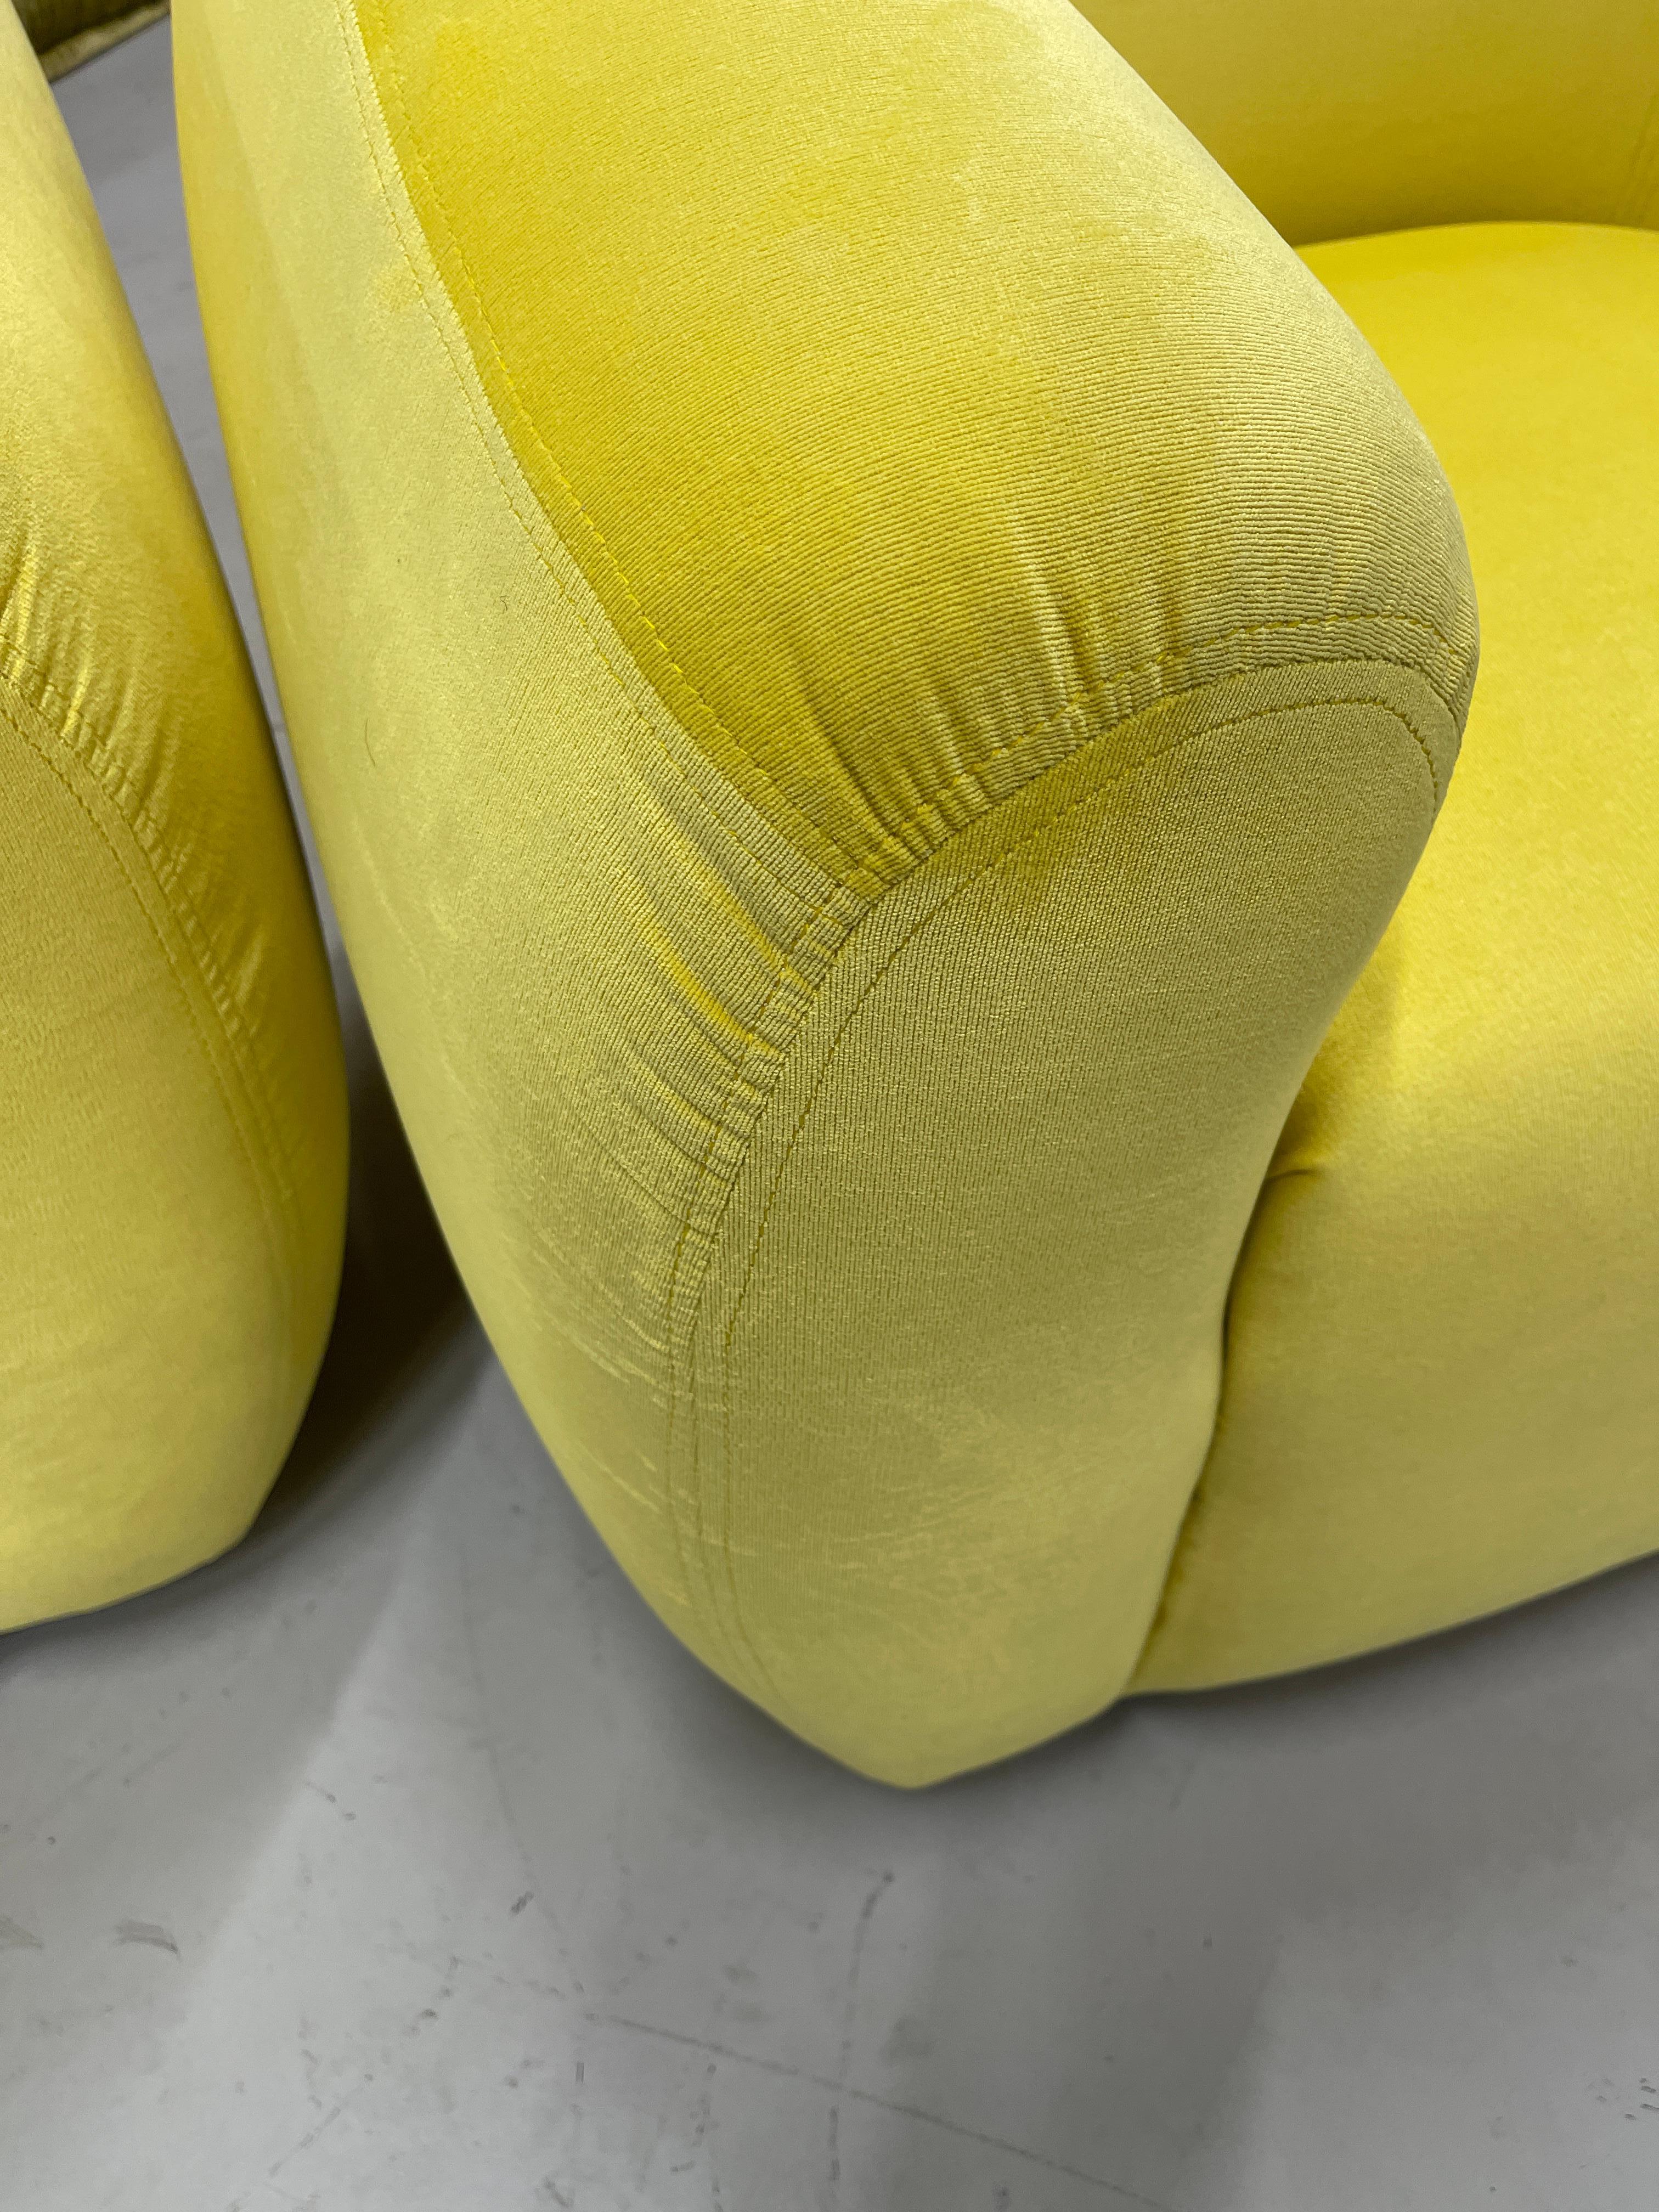 A Rudin Swivel Chairs in Limon Kravet Fabric 5